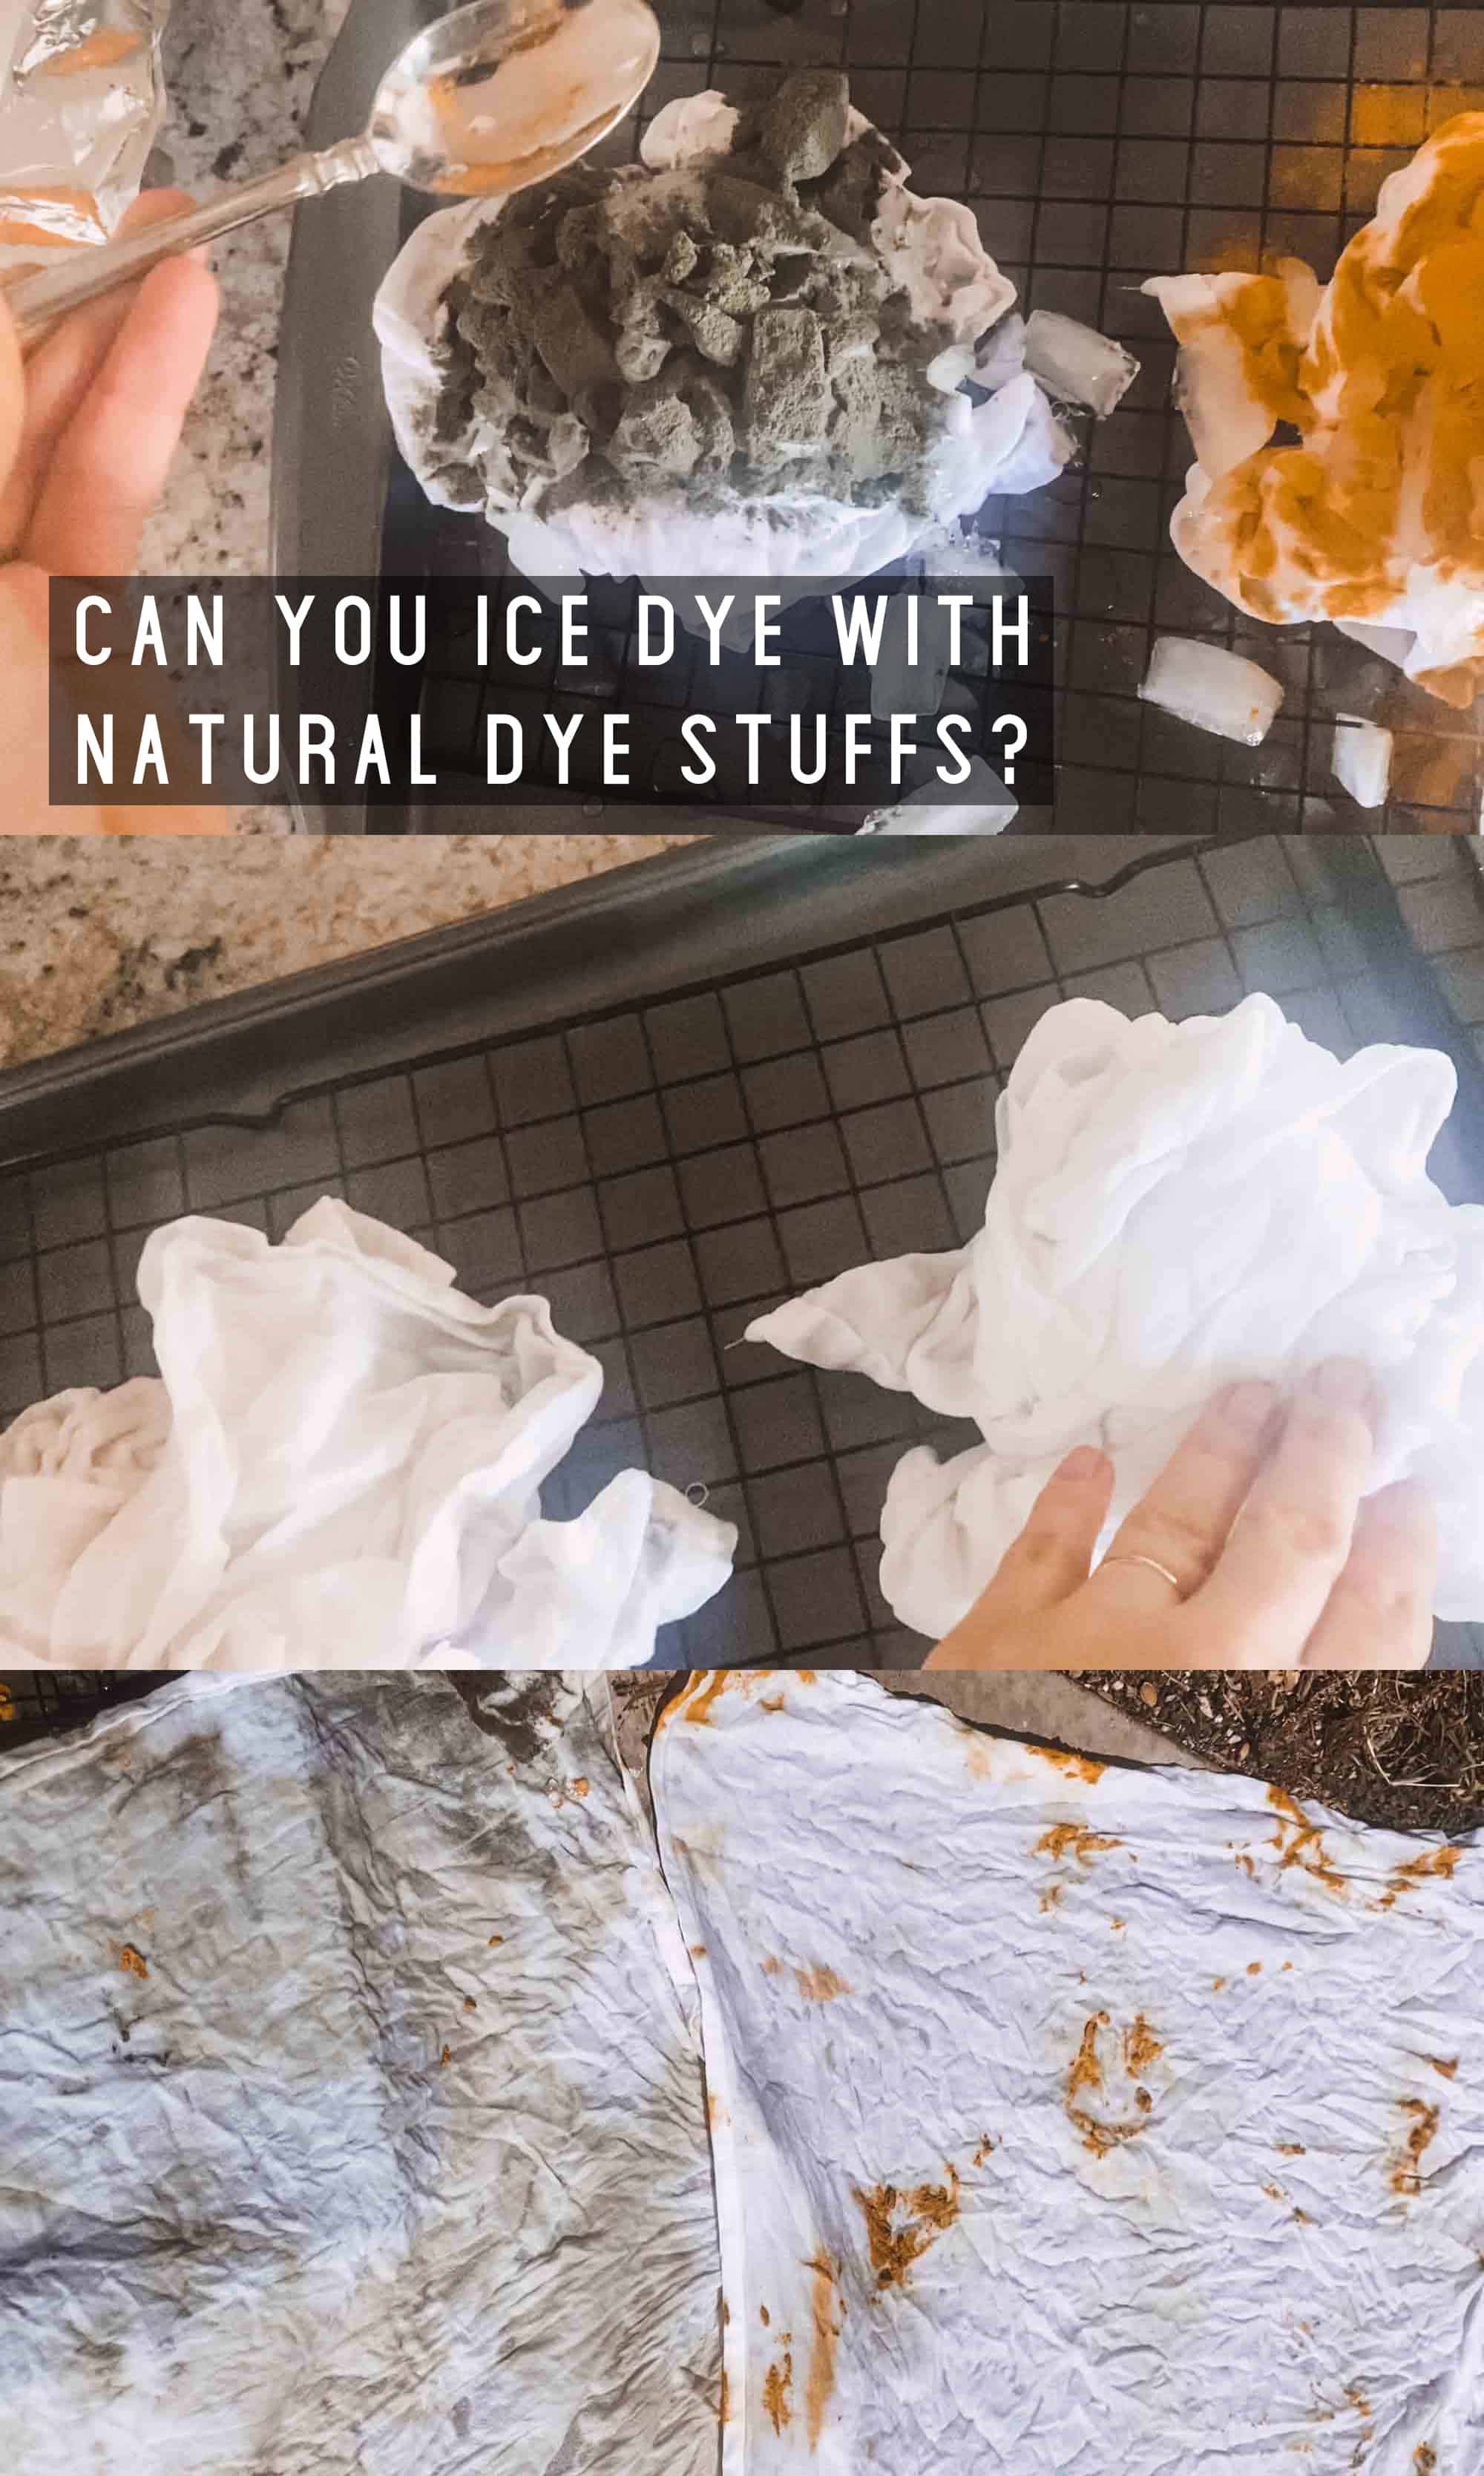 In this video and tutorial I share how I tried to ice dye with natural dye stuffs. Natural dyes are really fun, but it turns out not every method works!